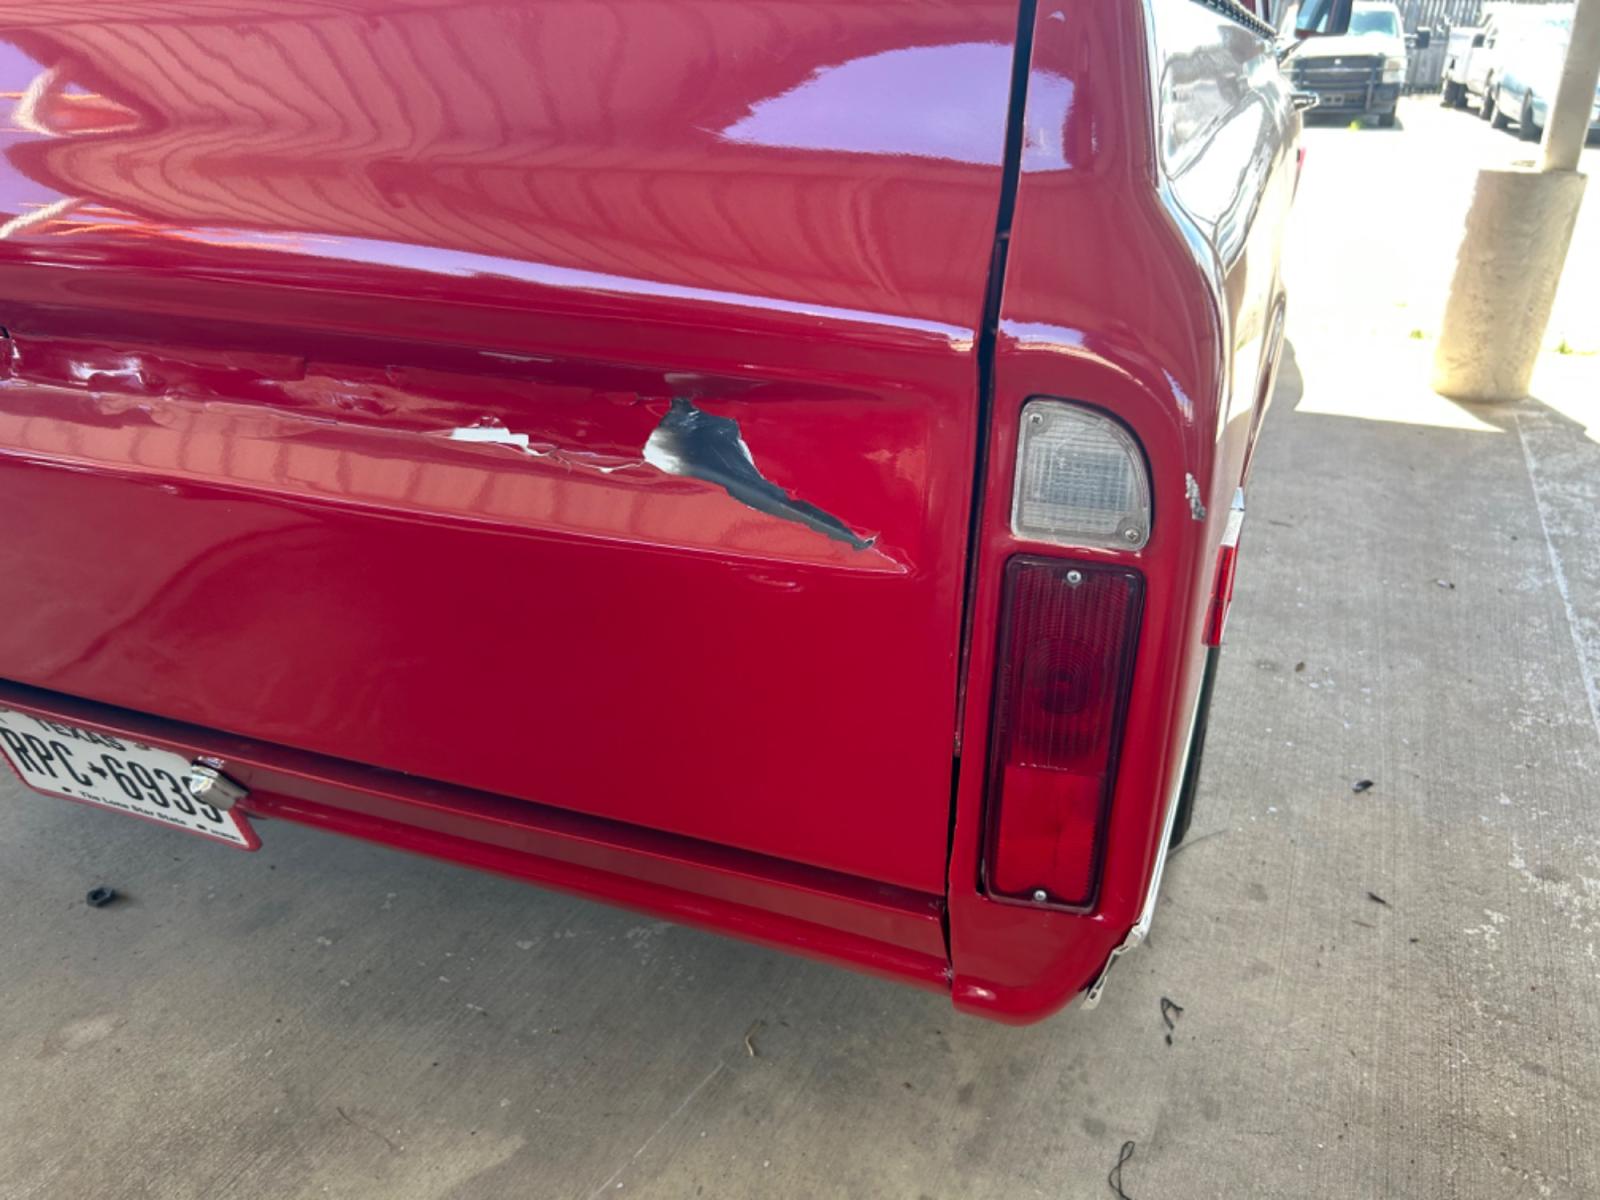 1972 Red Chevrolet C10 (CCE142A1201) , Automatic transmission, located at 1687 Business 35 S, New Braunfels, TX, 78130, (830) 625-7159, 29.655487, -98.051491 - 580 Horse Power - Photo #2